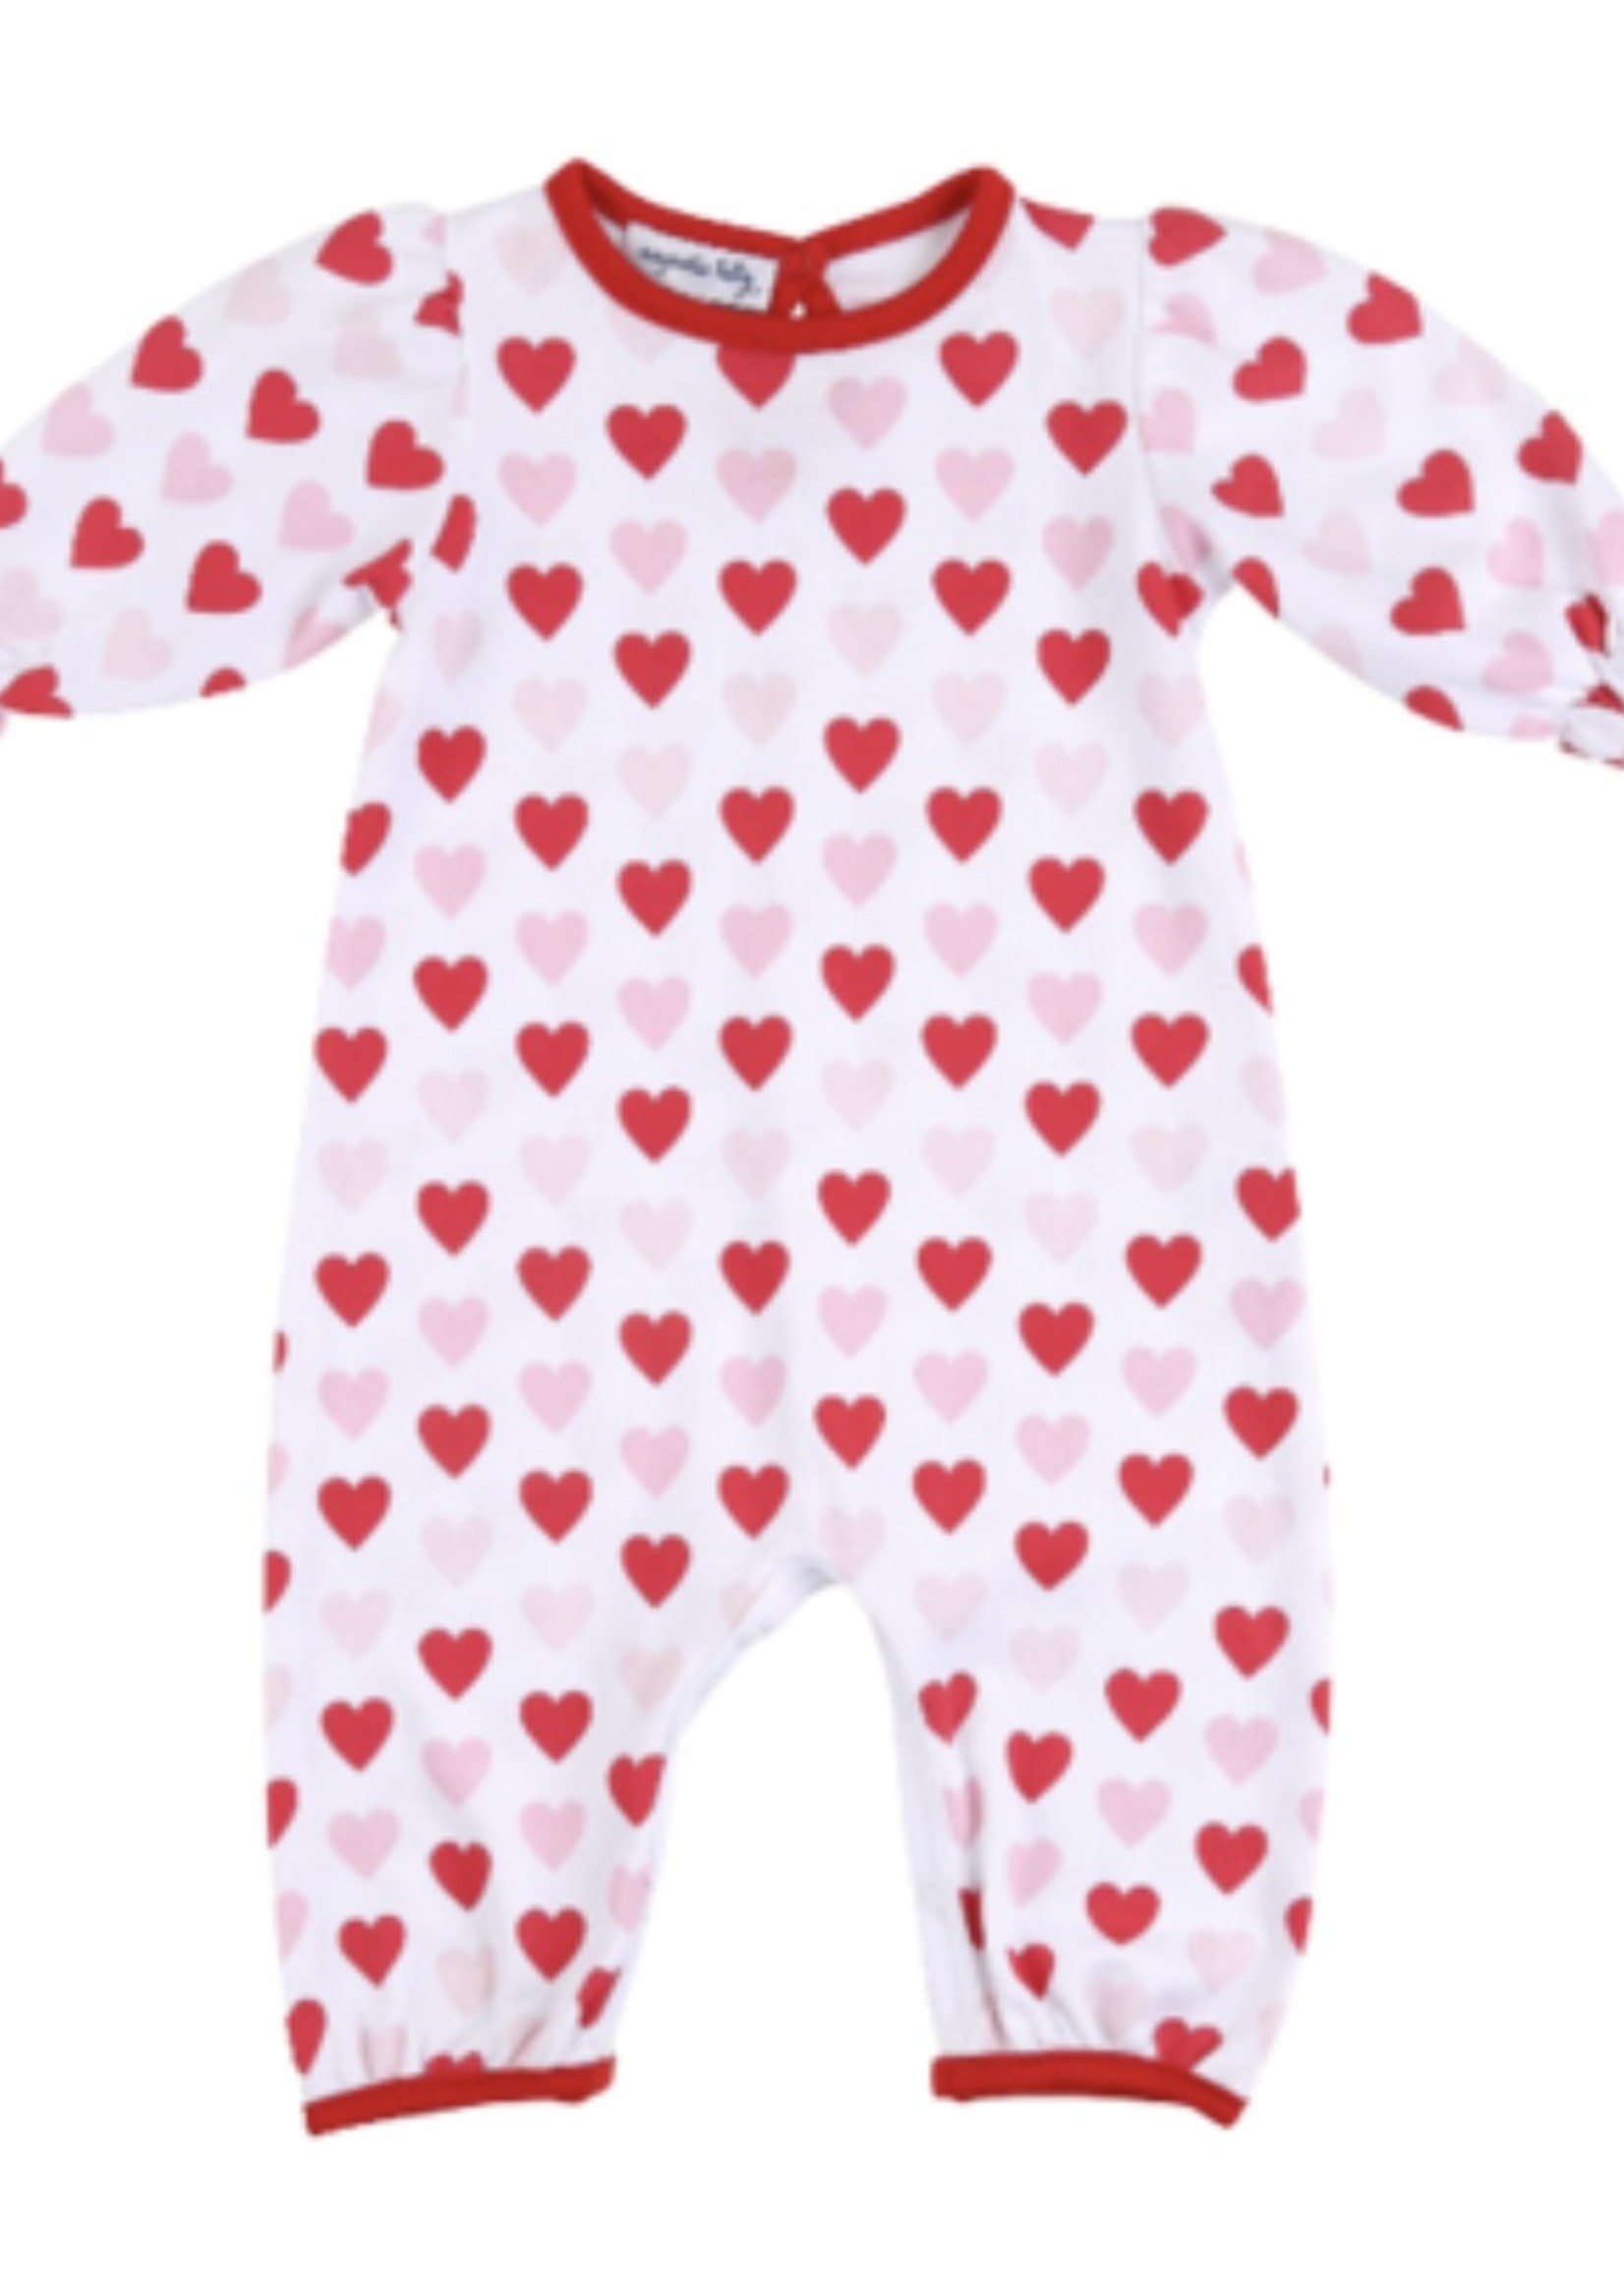 MAG RED HEART TO HEART PRINTED RUFFLE L/S PLAYSUIT